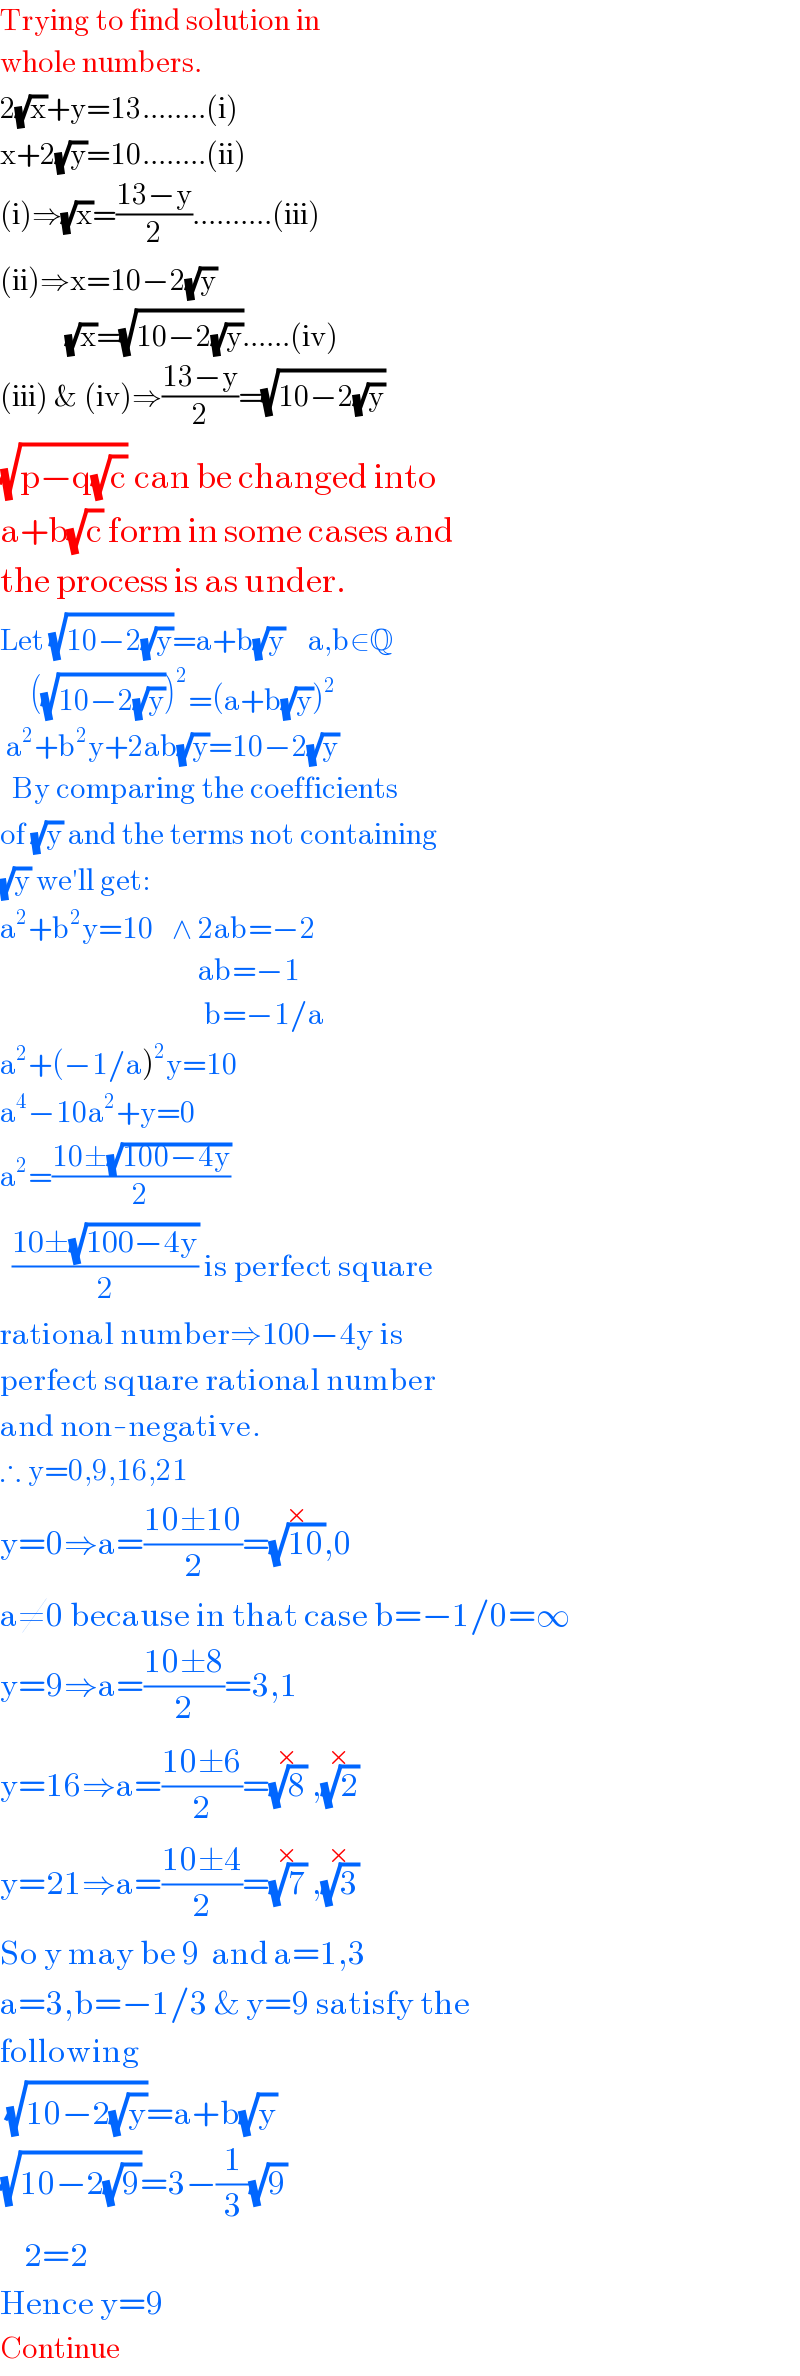 Trying to find solution in  whole numbers.  2(√x)+y=13........(i)  x+2(√y)=10........(ii)  (i)⇒(√x)=((13−y)/2)..........(iii)  (ii)⇒x=10−2(√y)             (√x)=(√(10−2(√y)))......(iv)  (iii) & (iv)⇒((13−y)/2)=(√(10−2(√y)))  (√(p−q(√c))) can be changed into  a+b(√c) form in some cases and  the process is as under.  Let (√(10−2(√y)))=a+b(√y)    a,b∈Q       ((√(10−2(√y))))^2 =(a+b(√y))^2    a^2 +b^2 y+2ab(√y)=10−2(√y)    By comparing the coefficients  of (√y) and the terms not containing  (√y) we′ll get:  a^2 +b^2 y=10   ∧ 2ab=−2                                   ab=−1                                    b=−1/a  a^2 +(−1/a)^2 y=10  a^4 −10a^2 +y=0  a^2 =((10±(√(100−4y)))/2)    ((10±(√(100−4y)))/2) is perfect square  rational number⇒100−4y is  perfect square rational number  and non-negative.  ∴ y=0,9,16,21  y=0⇒a=((10±10)/2)=(√(10))^(×) ,0  a≠0 because in that case b=−1/0=∞  y=9⇒a=((10±8)/2)=3,1  y=16⇒a=((10±6)/2)=(√8)^(×)  ,(√2)^(×)    y=21⇒a=((10±4)/2)=(√7)^(×)  ,(√3)^(×)   So y may be 9  and a=1,3  a=3,b=−1/3 & y=9 satisfy the  following   (√(10−2(√y)))=a+b(√y)   (√(10−2(√9)))=3−(1/3)(√9)      2=2  Hence y=9  Continue  